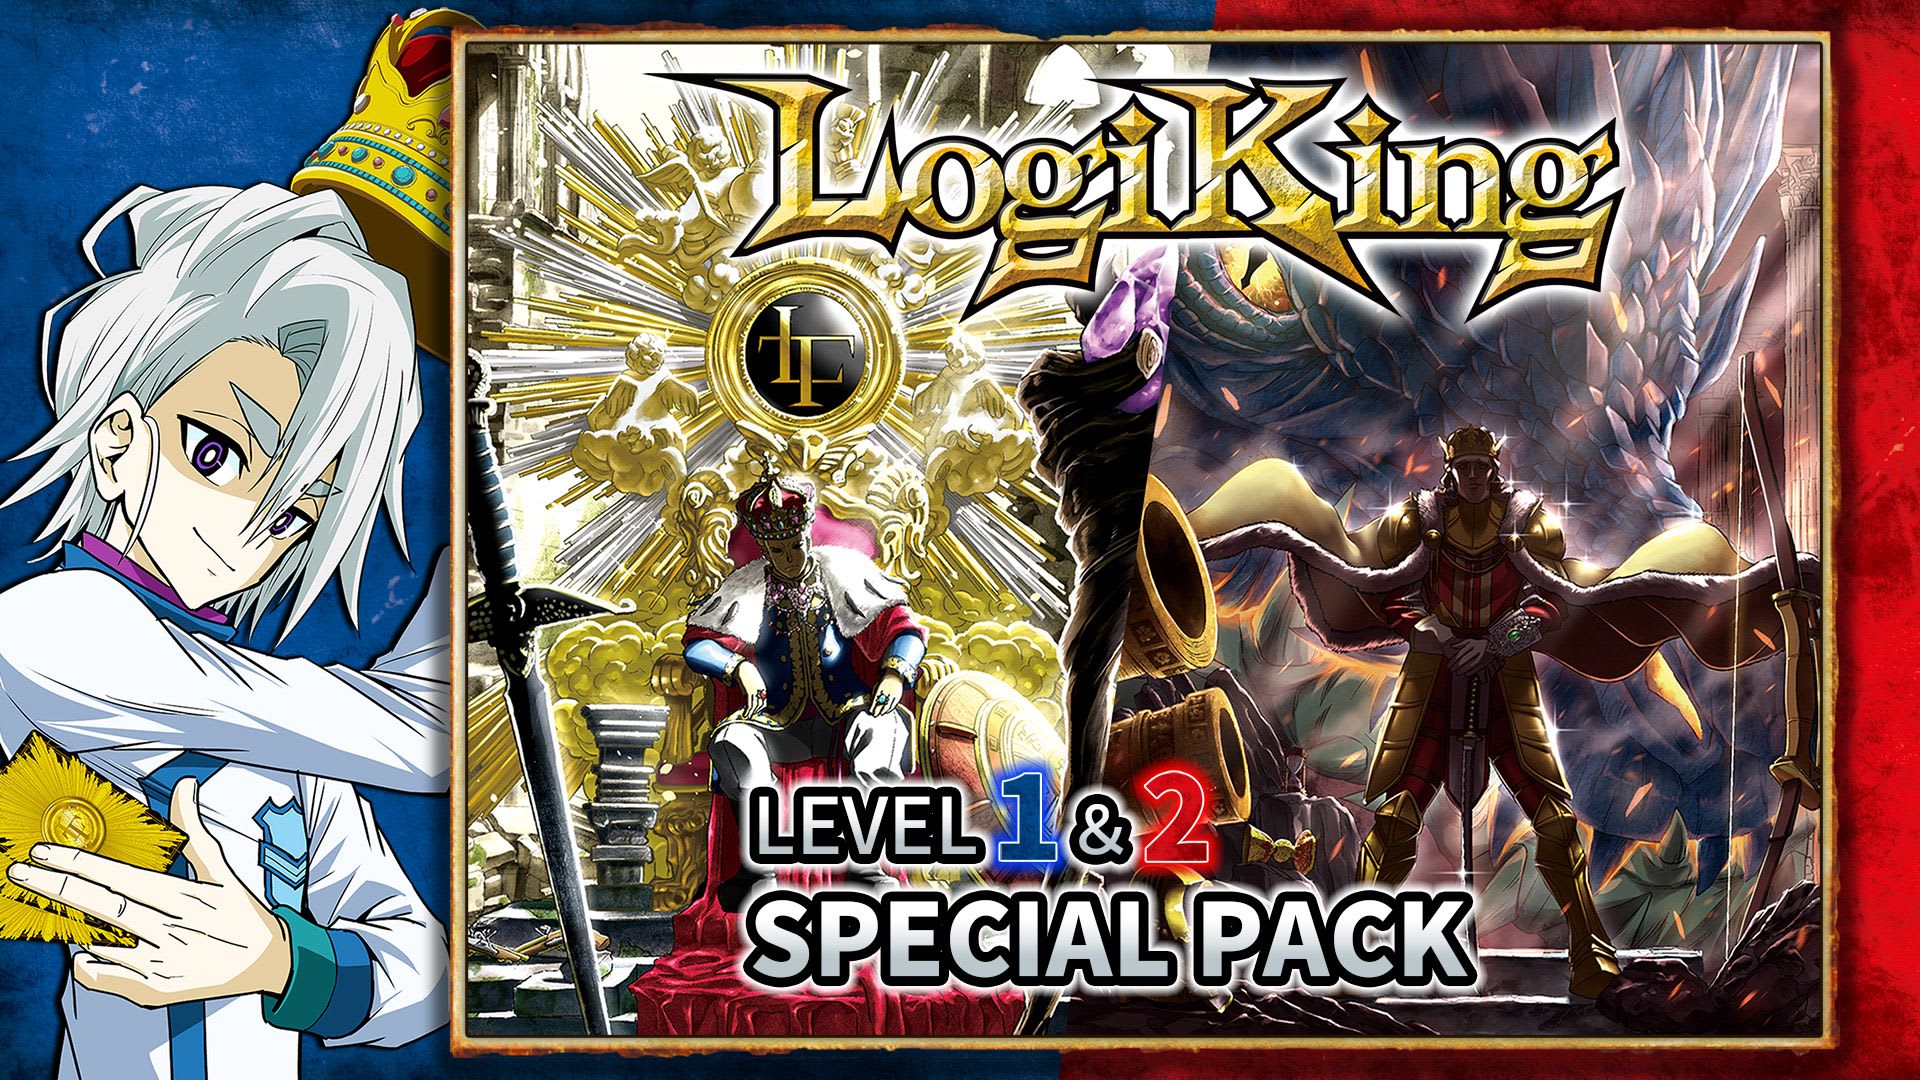 LogiKing LEVEL1 & 2 Special Pack